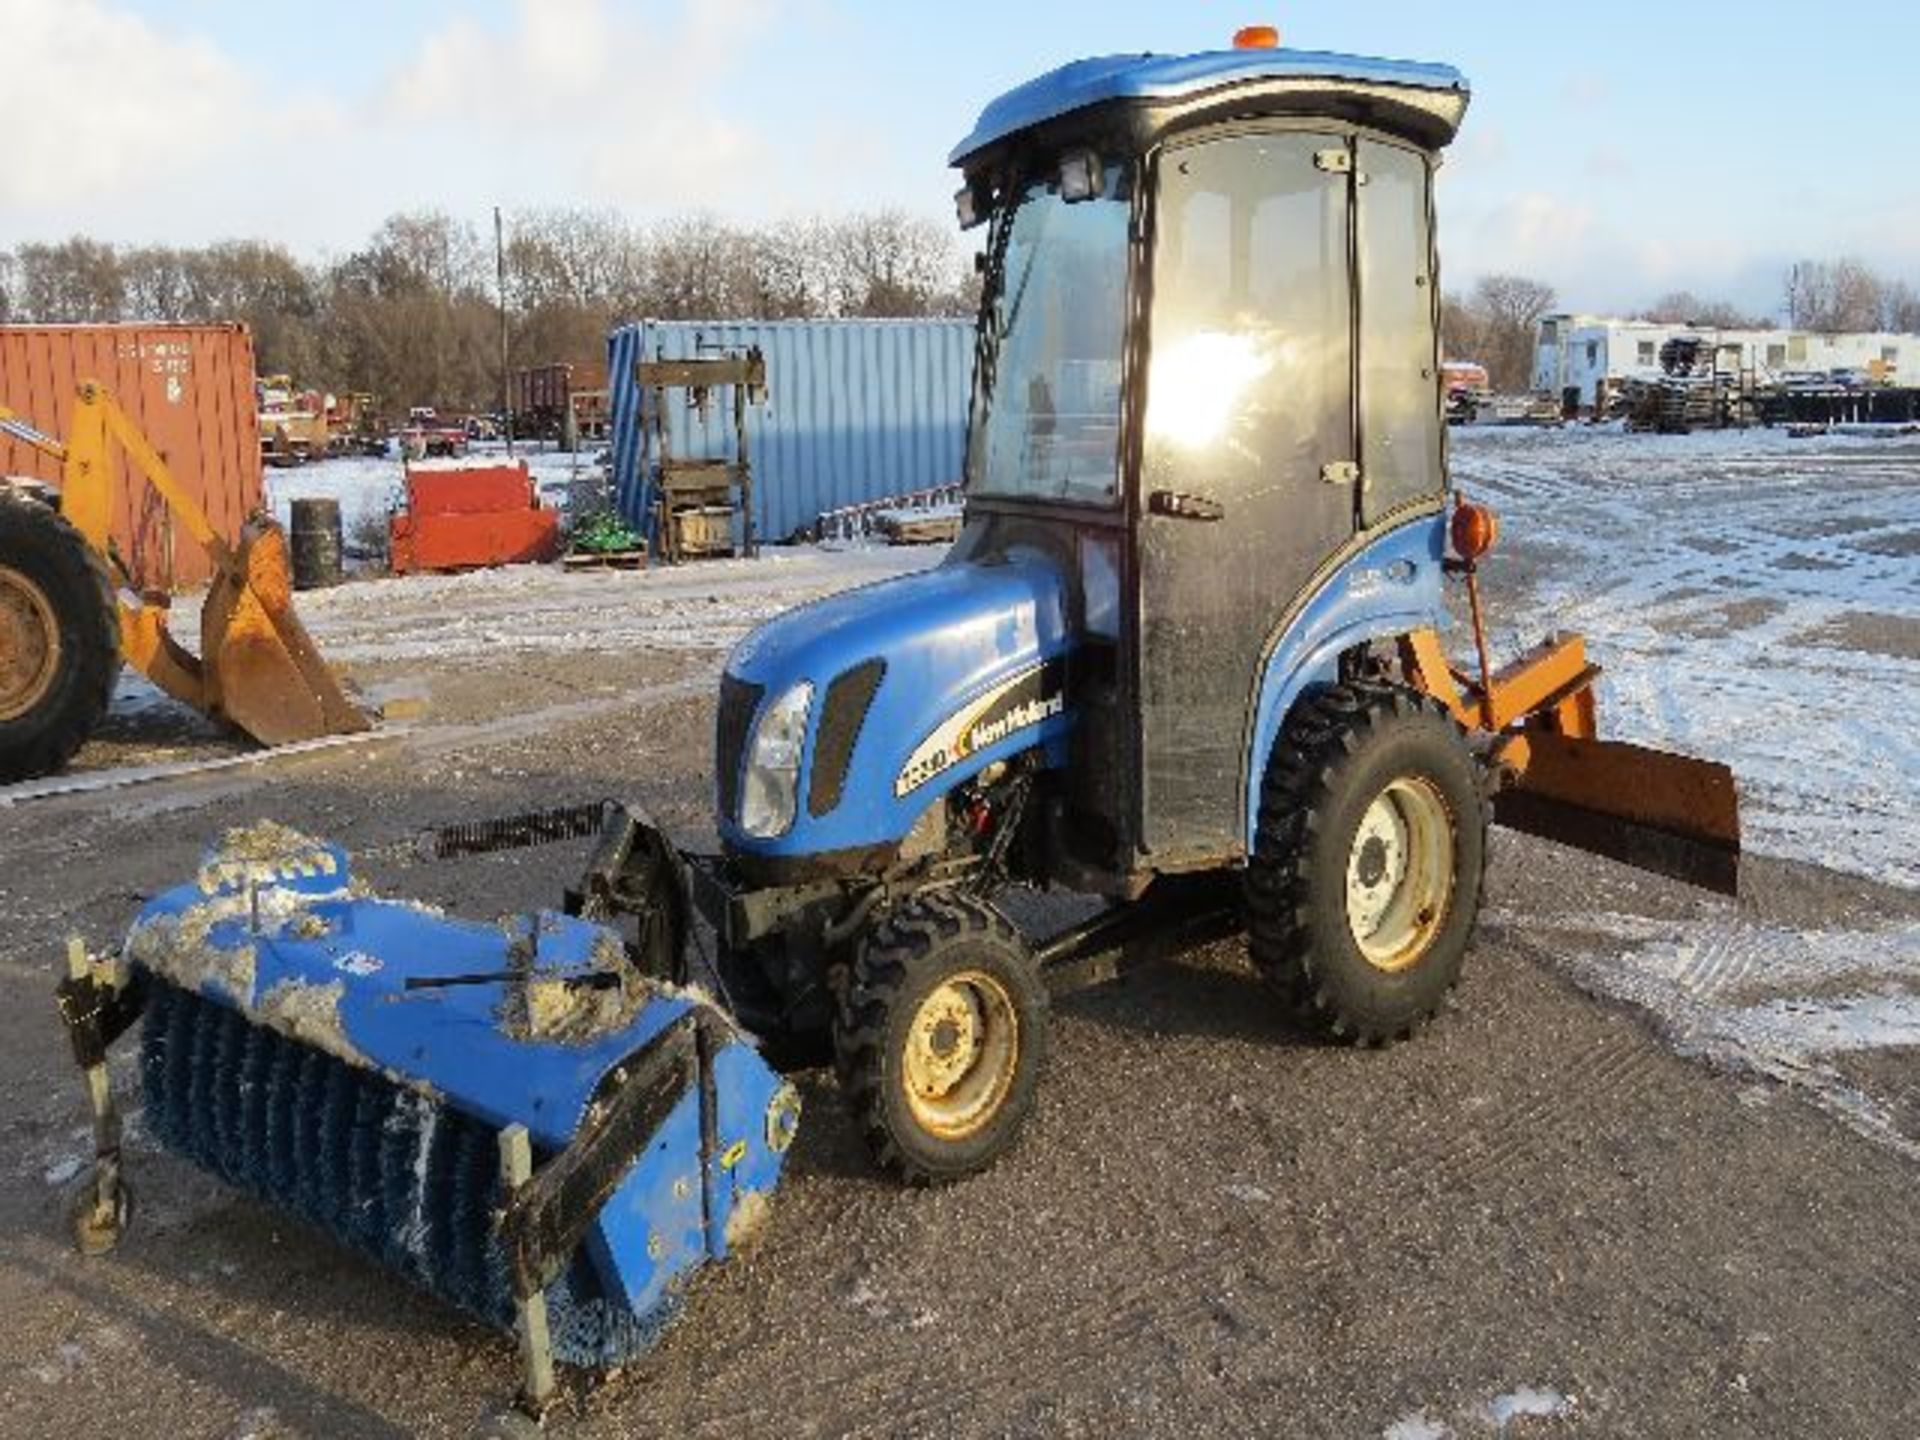 2004 New Holland model  TC24DA tractor, sn HG10183, 260 hrs. on meter, front wheel assist, cab,